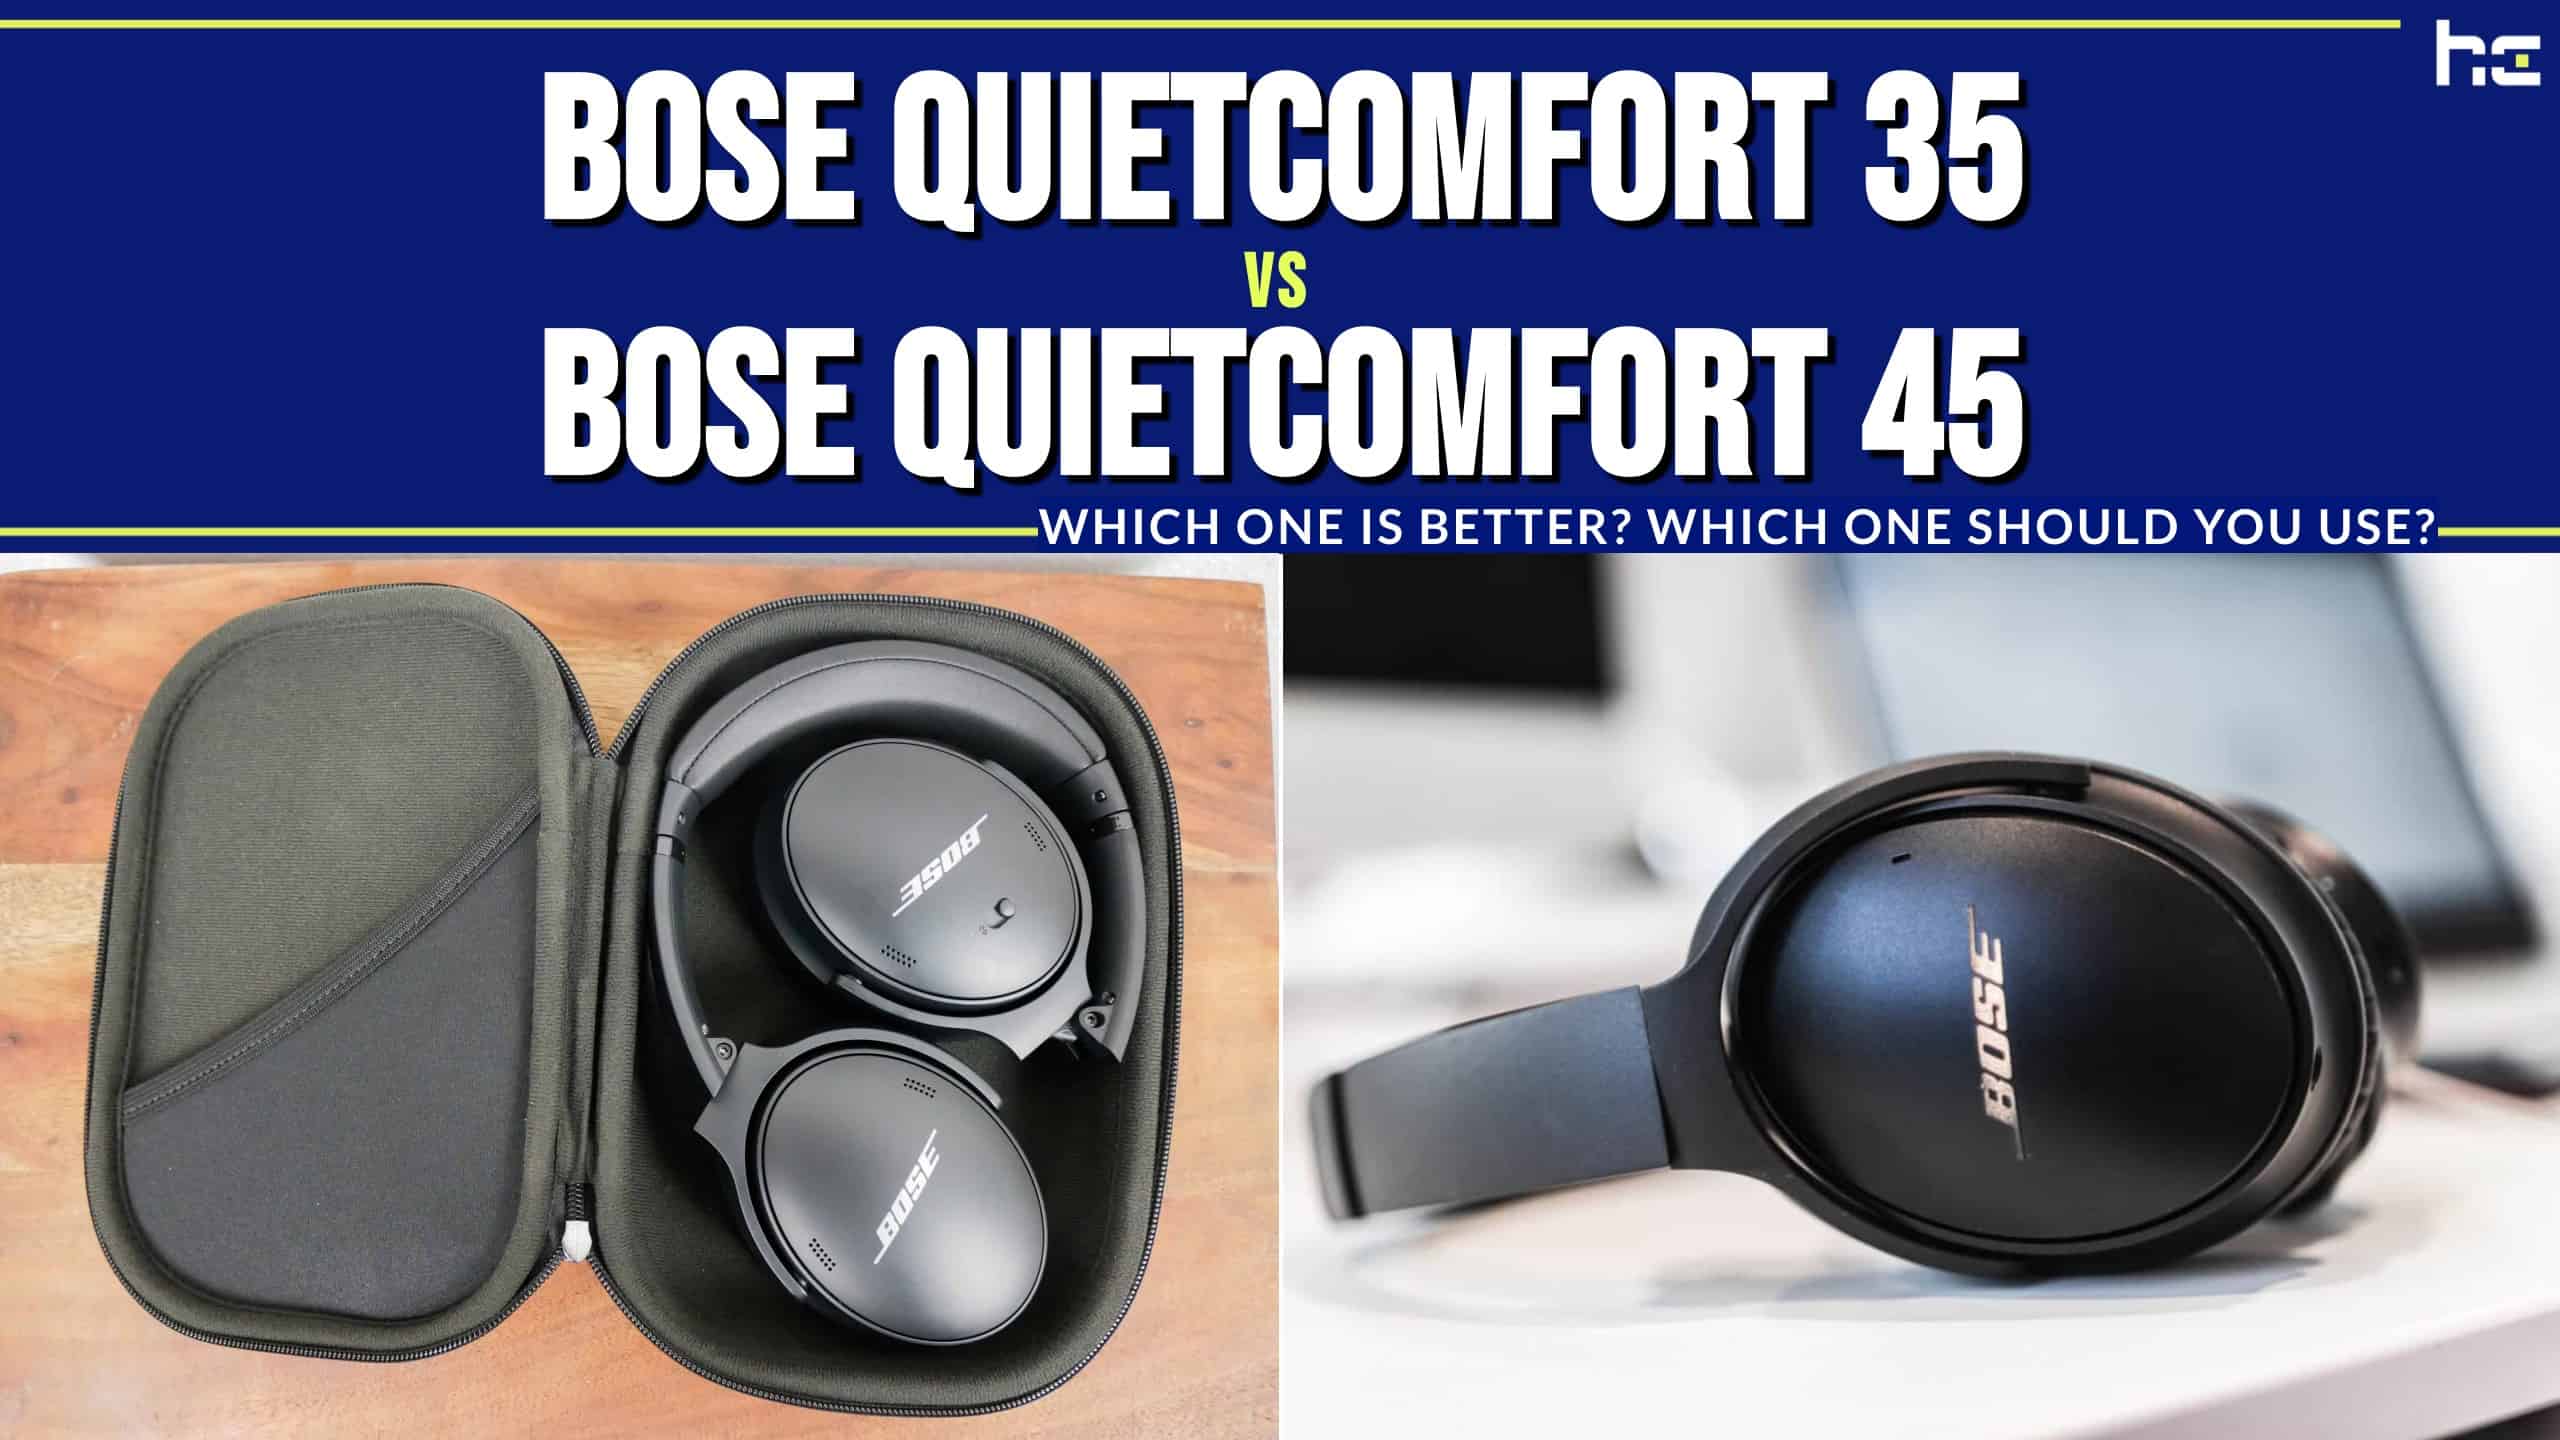 Bose QuietComfort 35 vs. Bose QuietComfort 45: What's The Real Difference?  - History-Computer